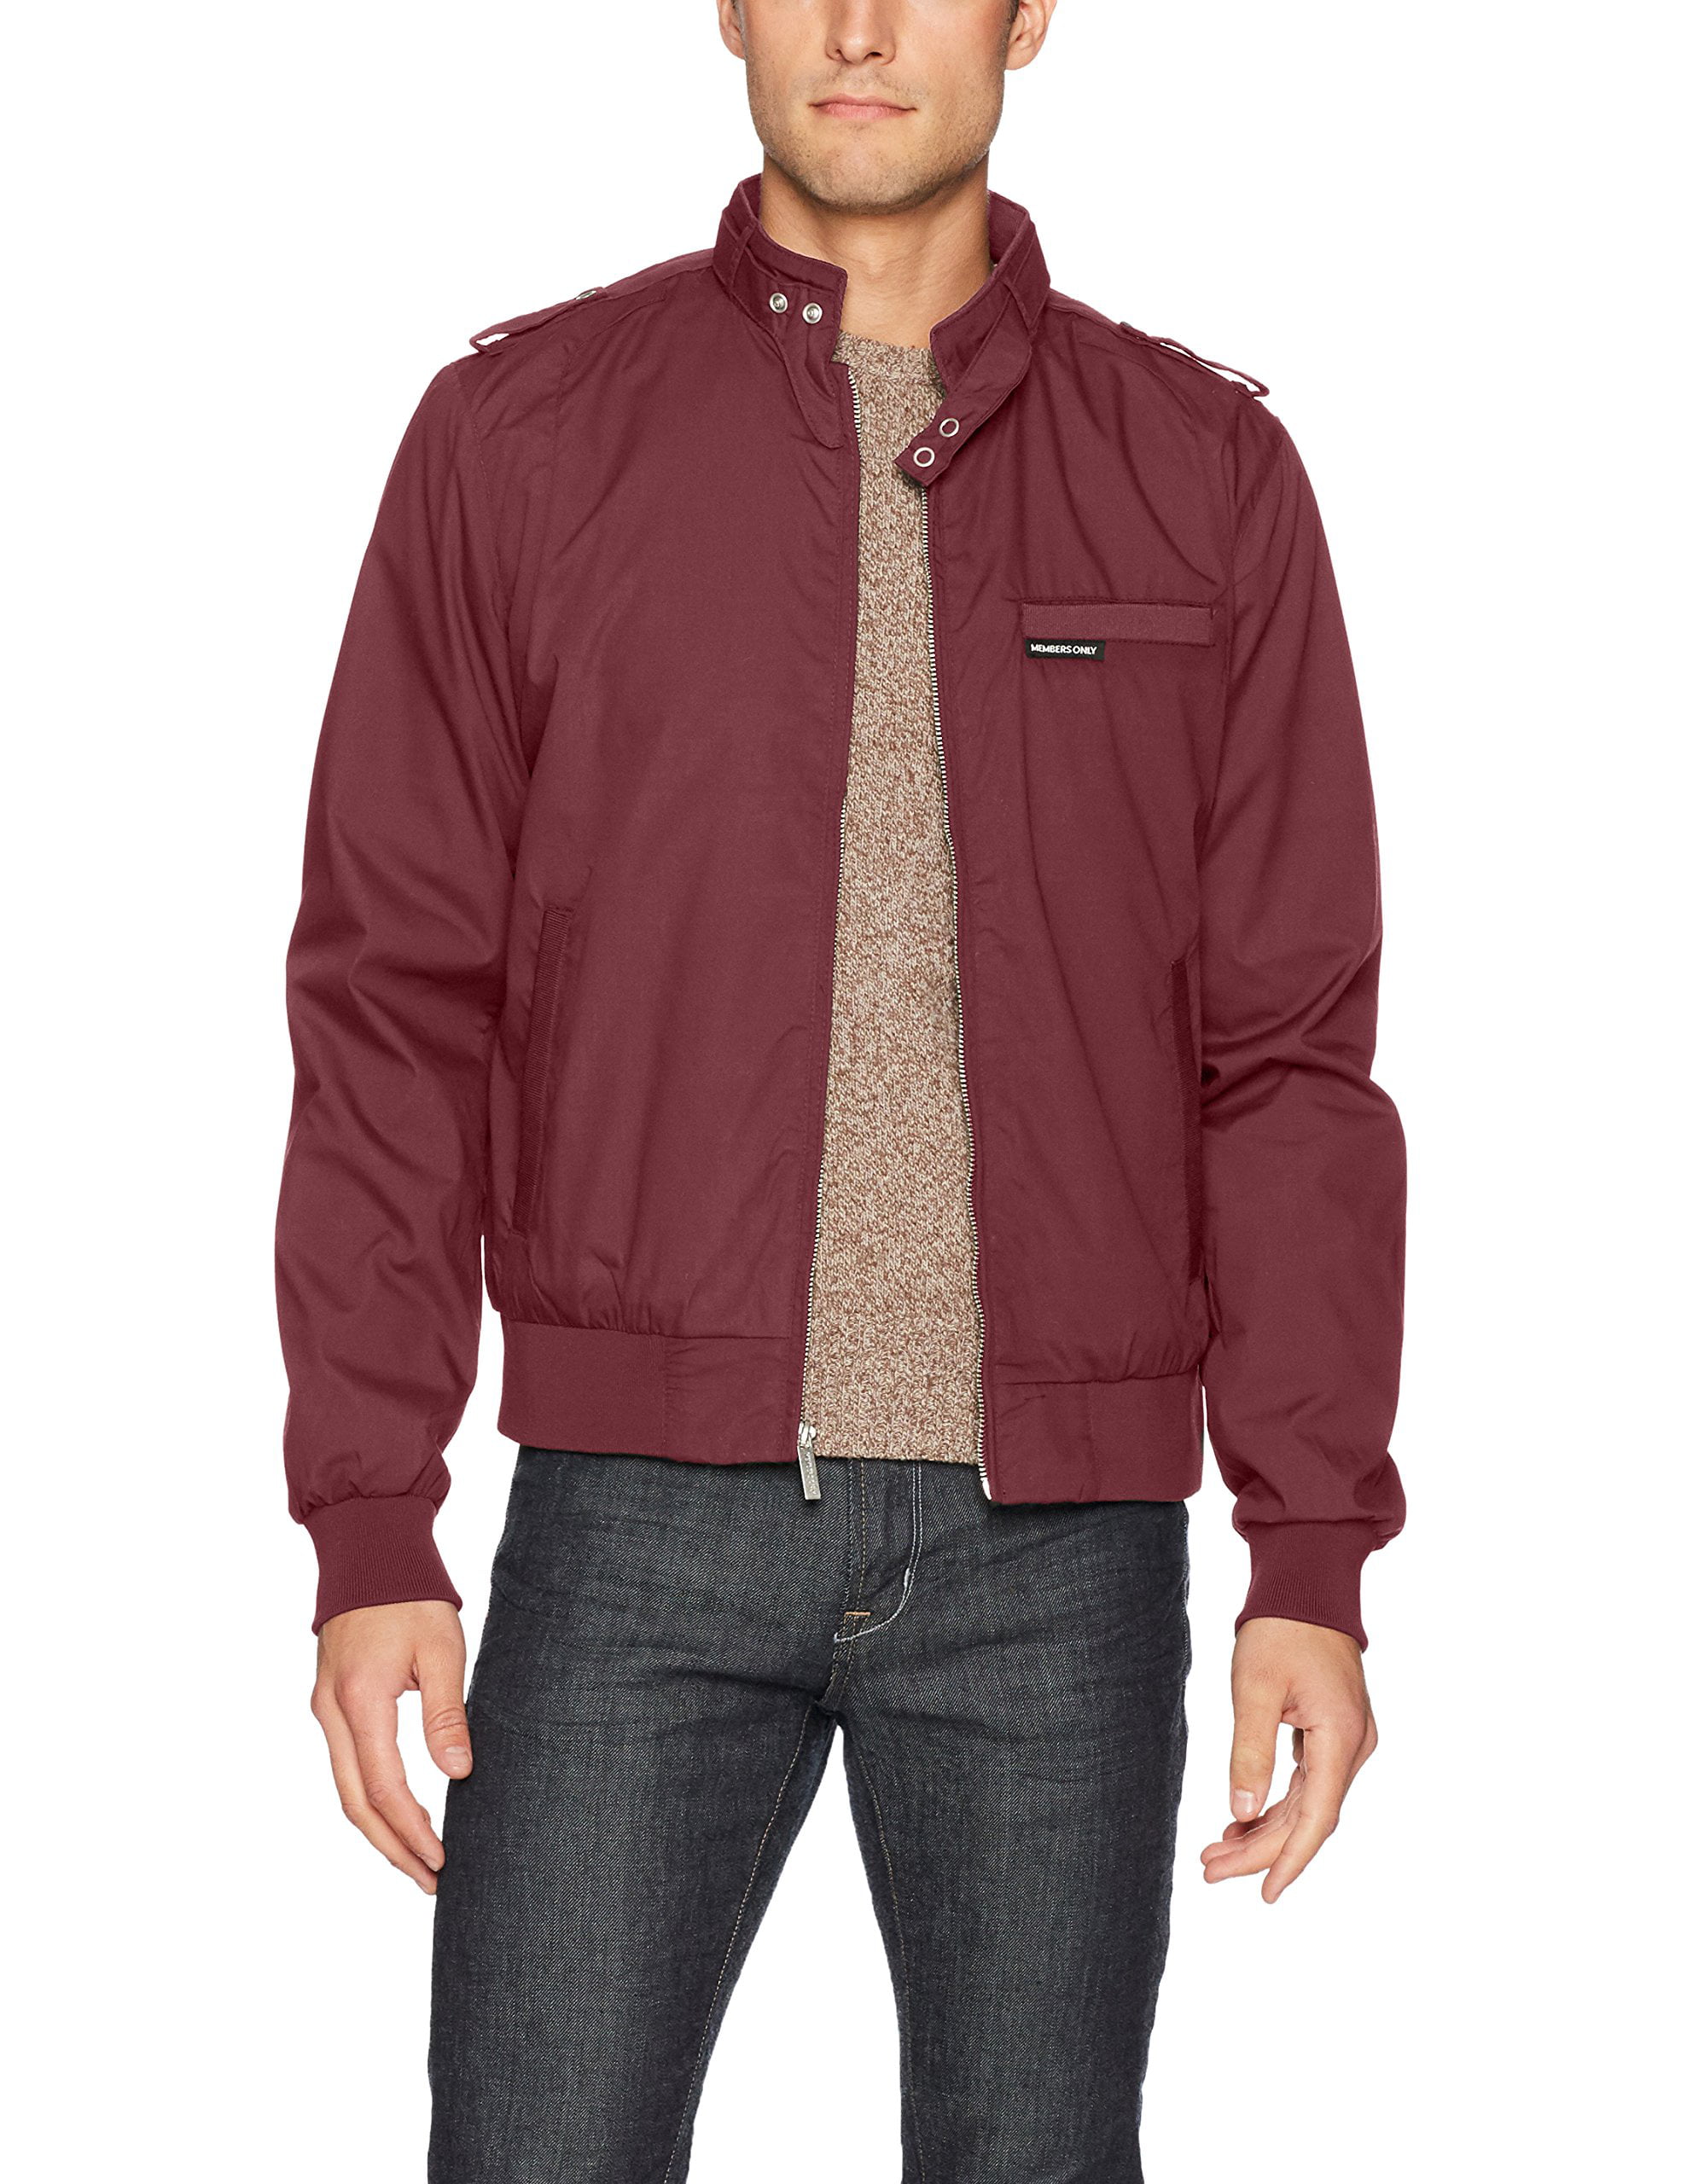 Members Only - Members Only Men's Classic Iconic Racer Jacket SlimF ...